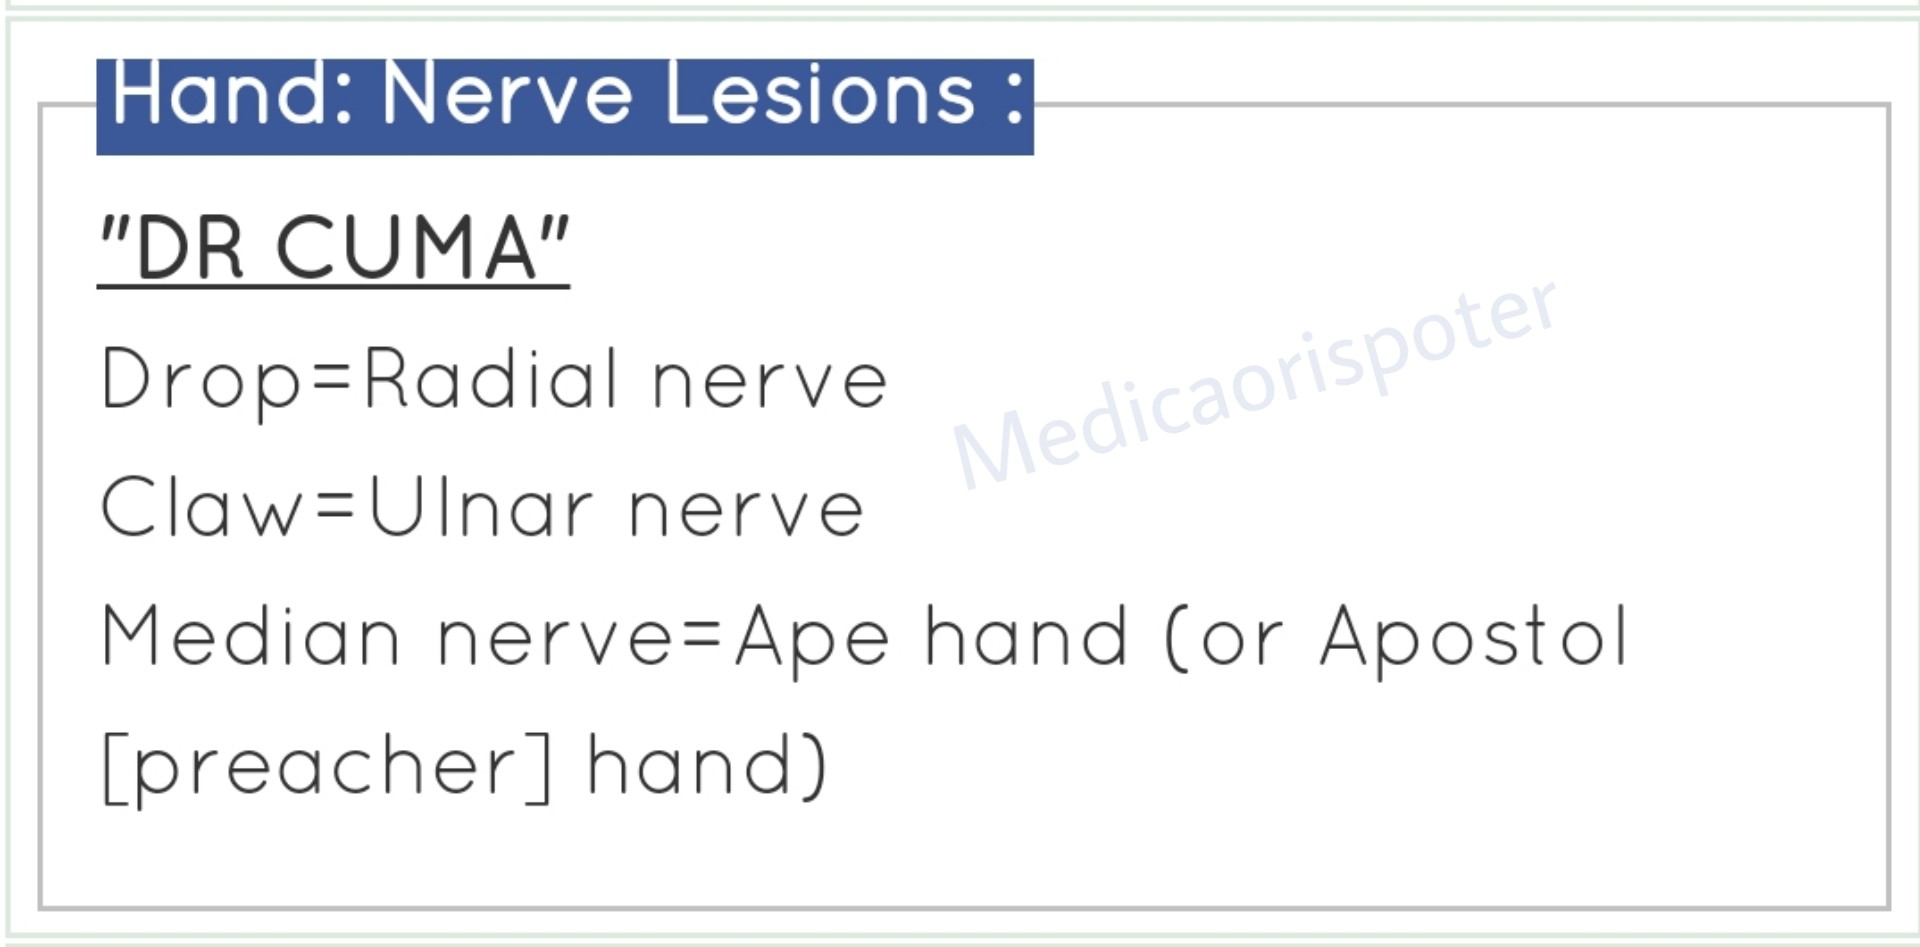 Products of Nerve Lesions in the Hand